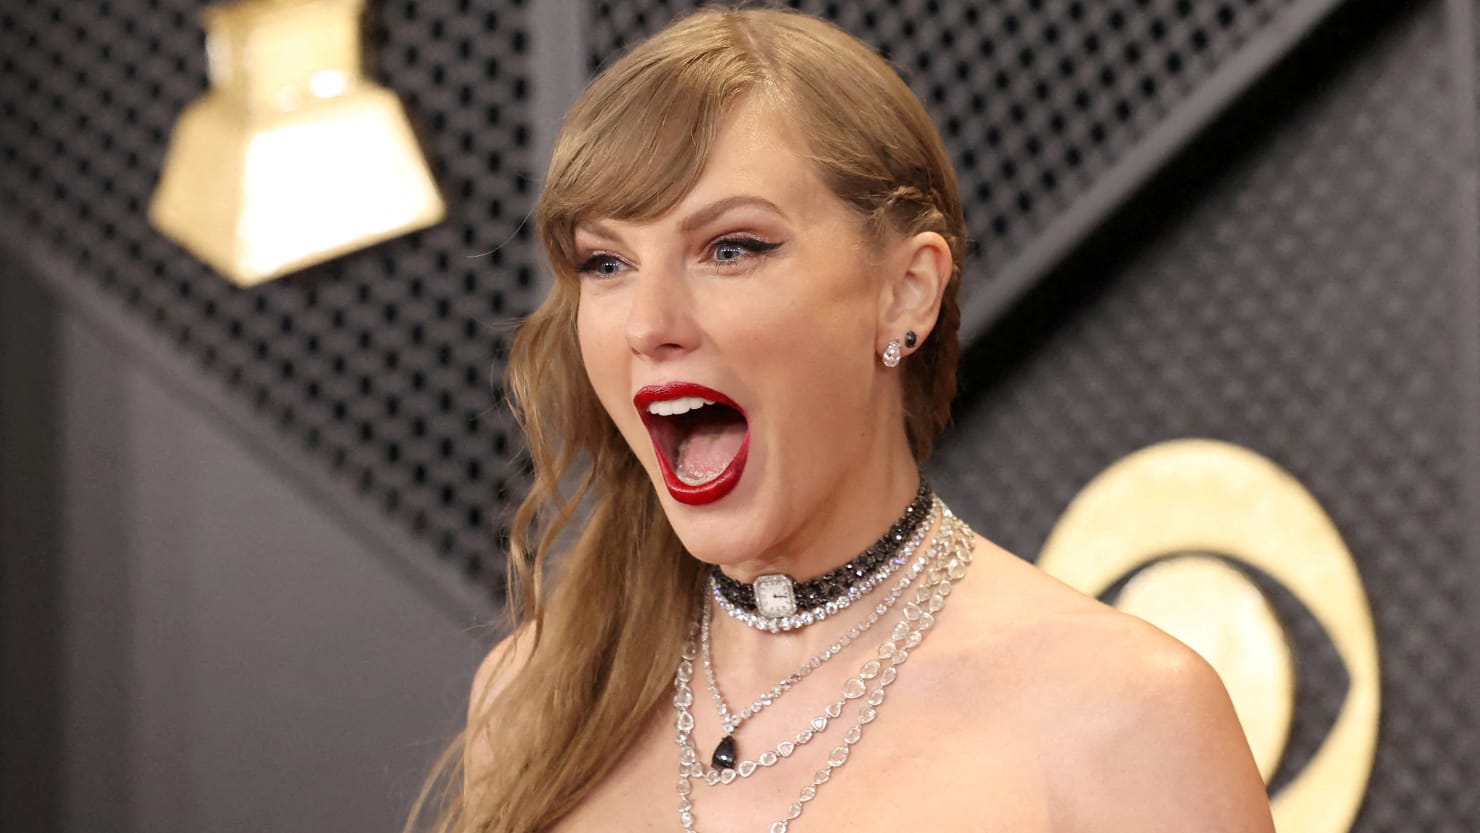 Taylor Swift is “absolutely overwhelmed” with her landmark debut album